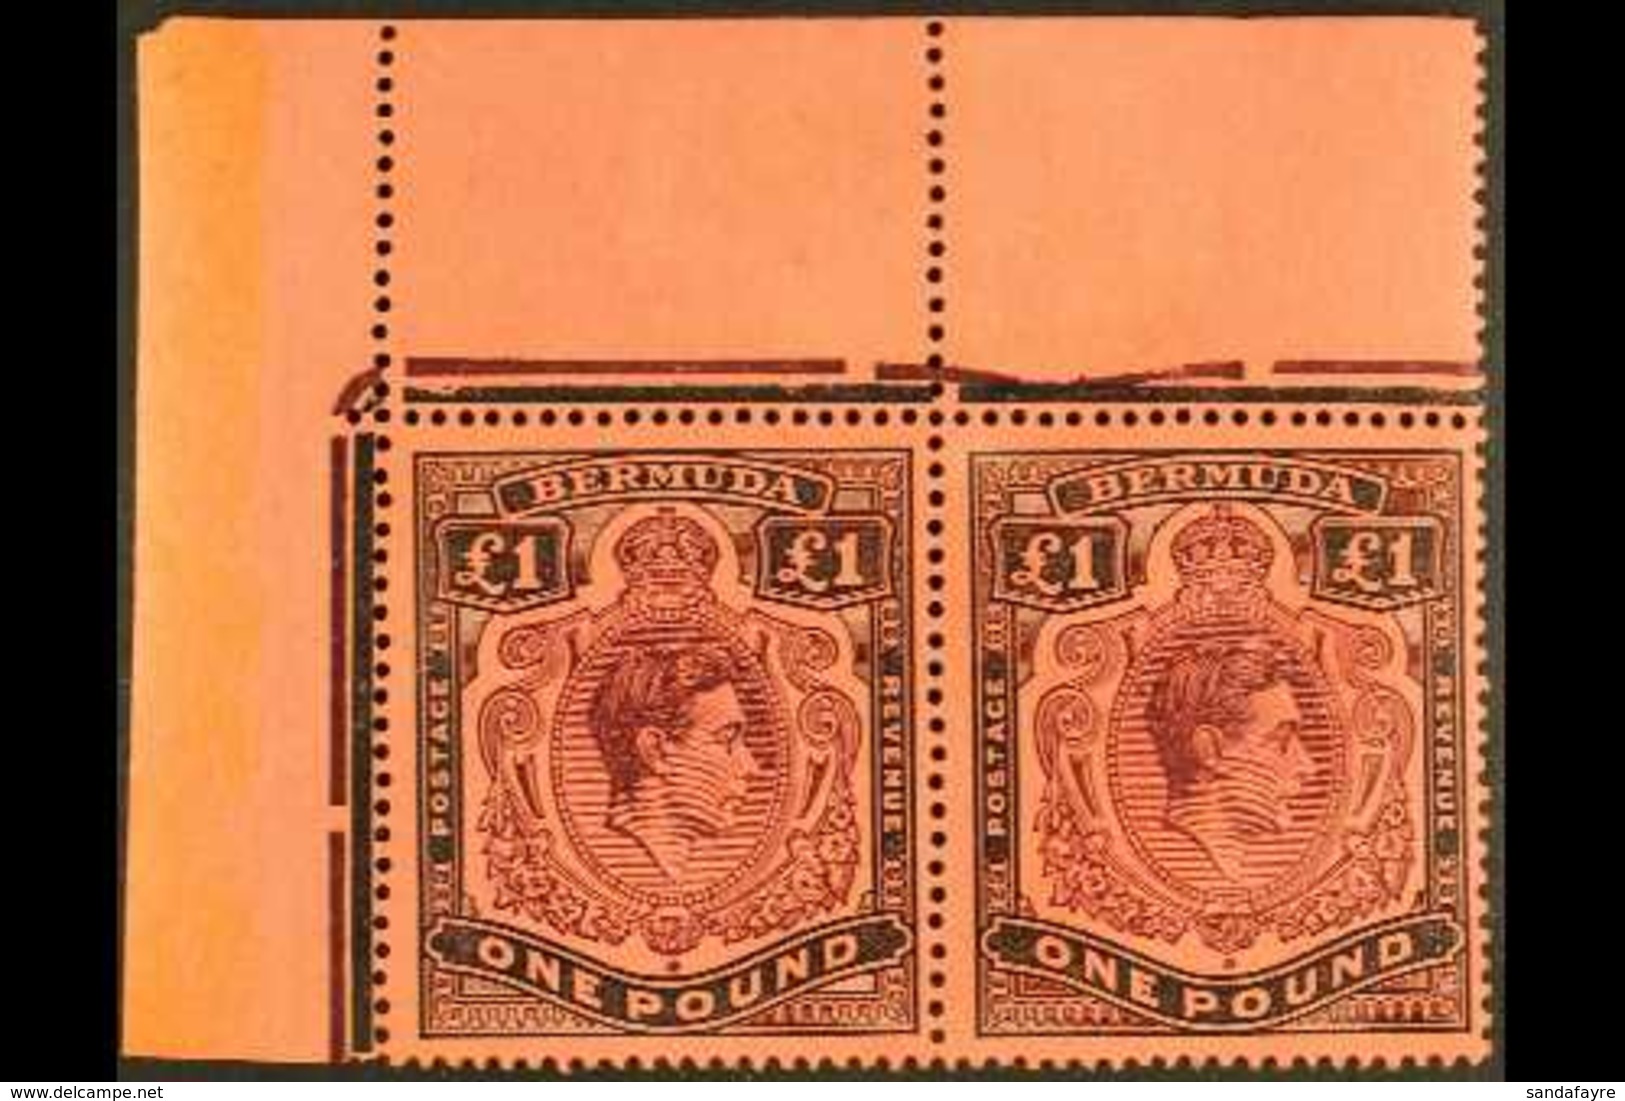 1943  £1 Deep Reddish Purple And Black With "ER" JOINED Variety In Upper Left Corner PAIR WITH NORMAL, SG 121b+121ba, Ne - Bermuda